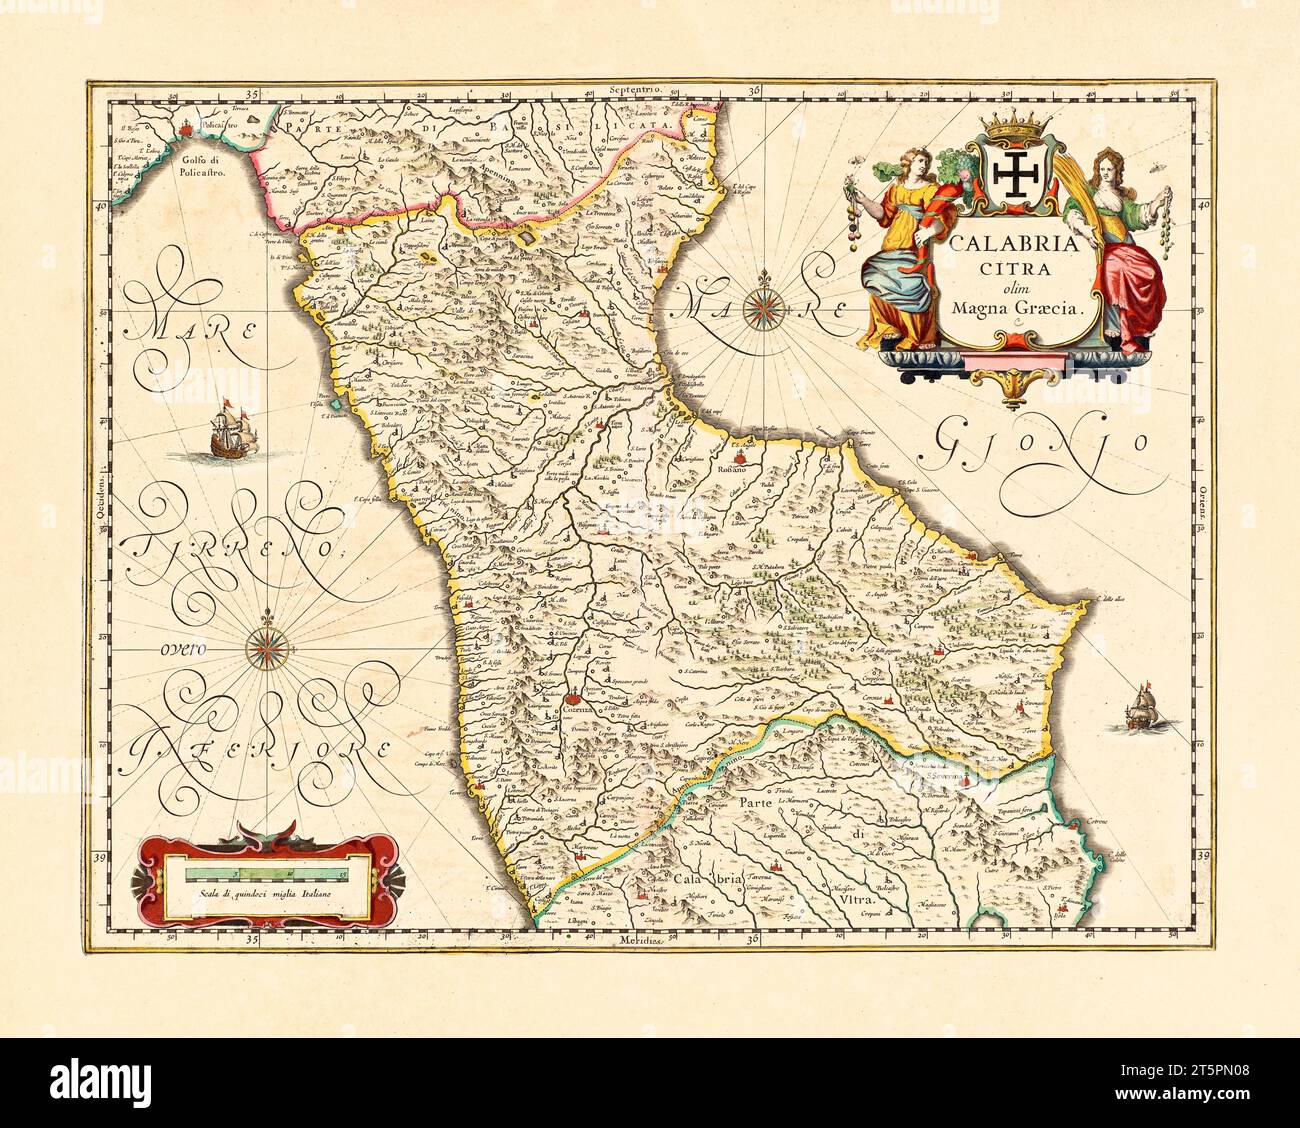 Old map of Northern Calabria, Italy. By Blaeu, publ. ca. 1640 Stock Photo